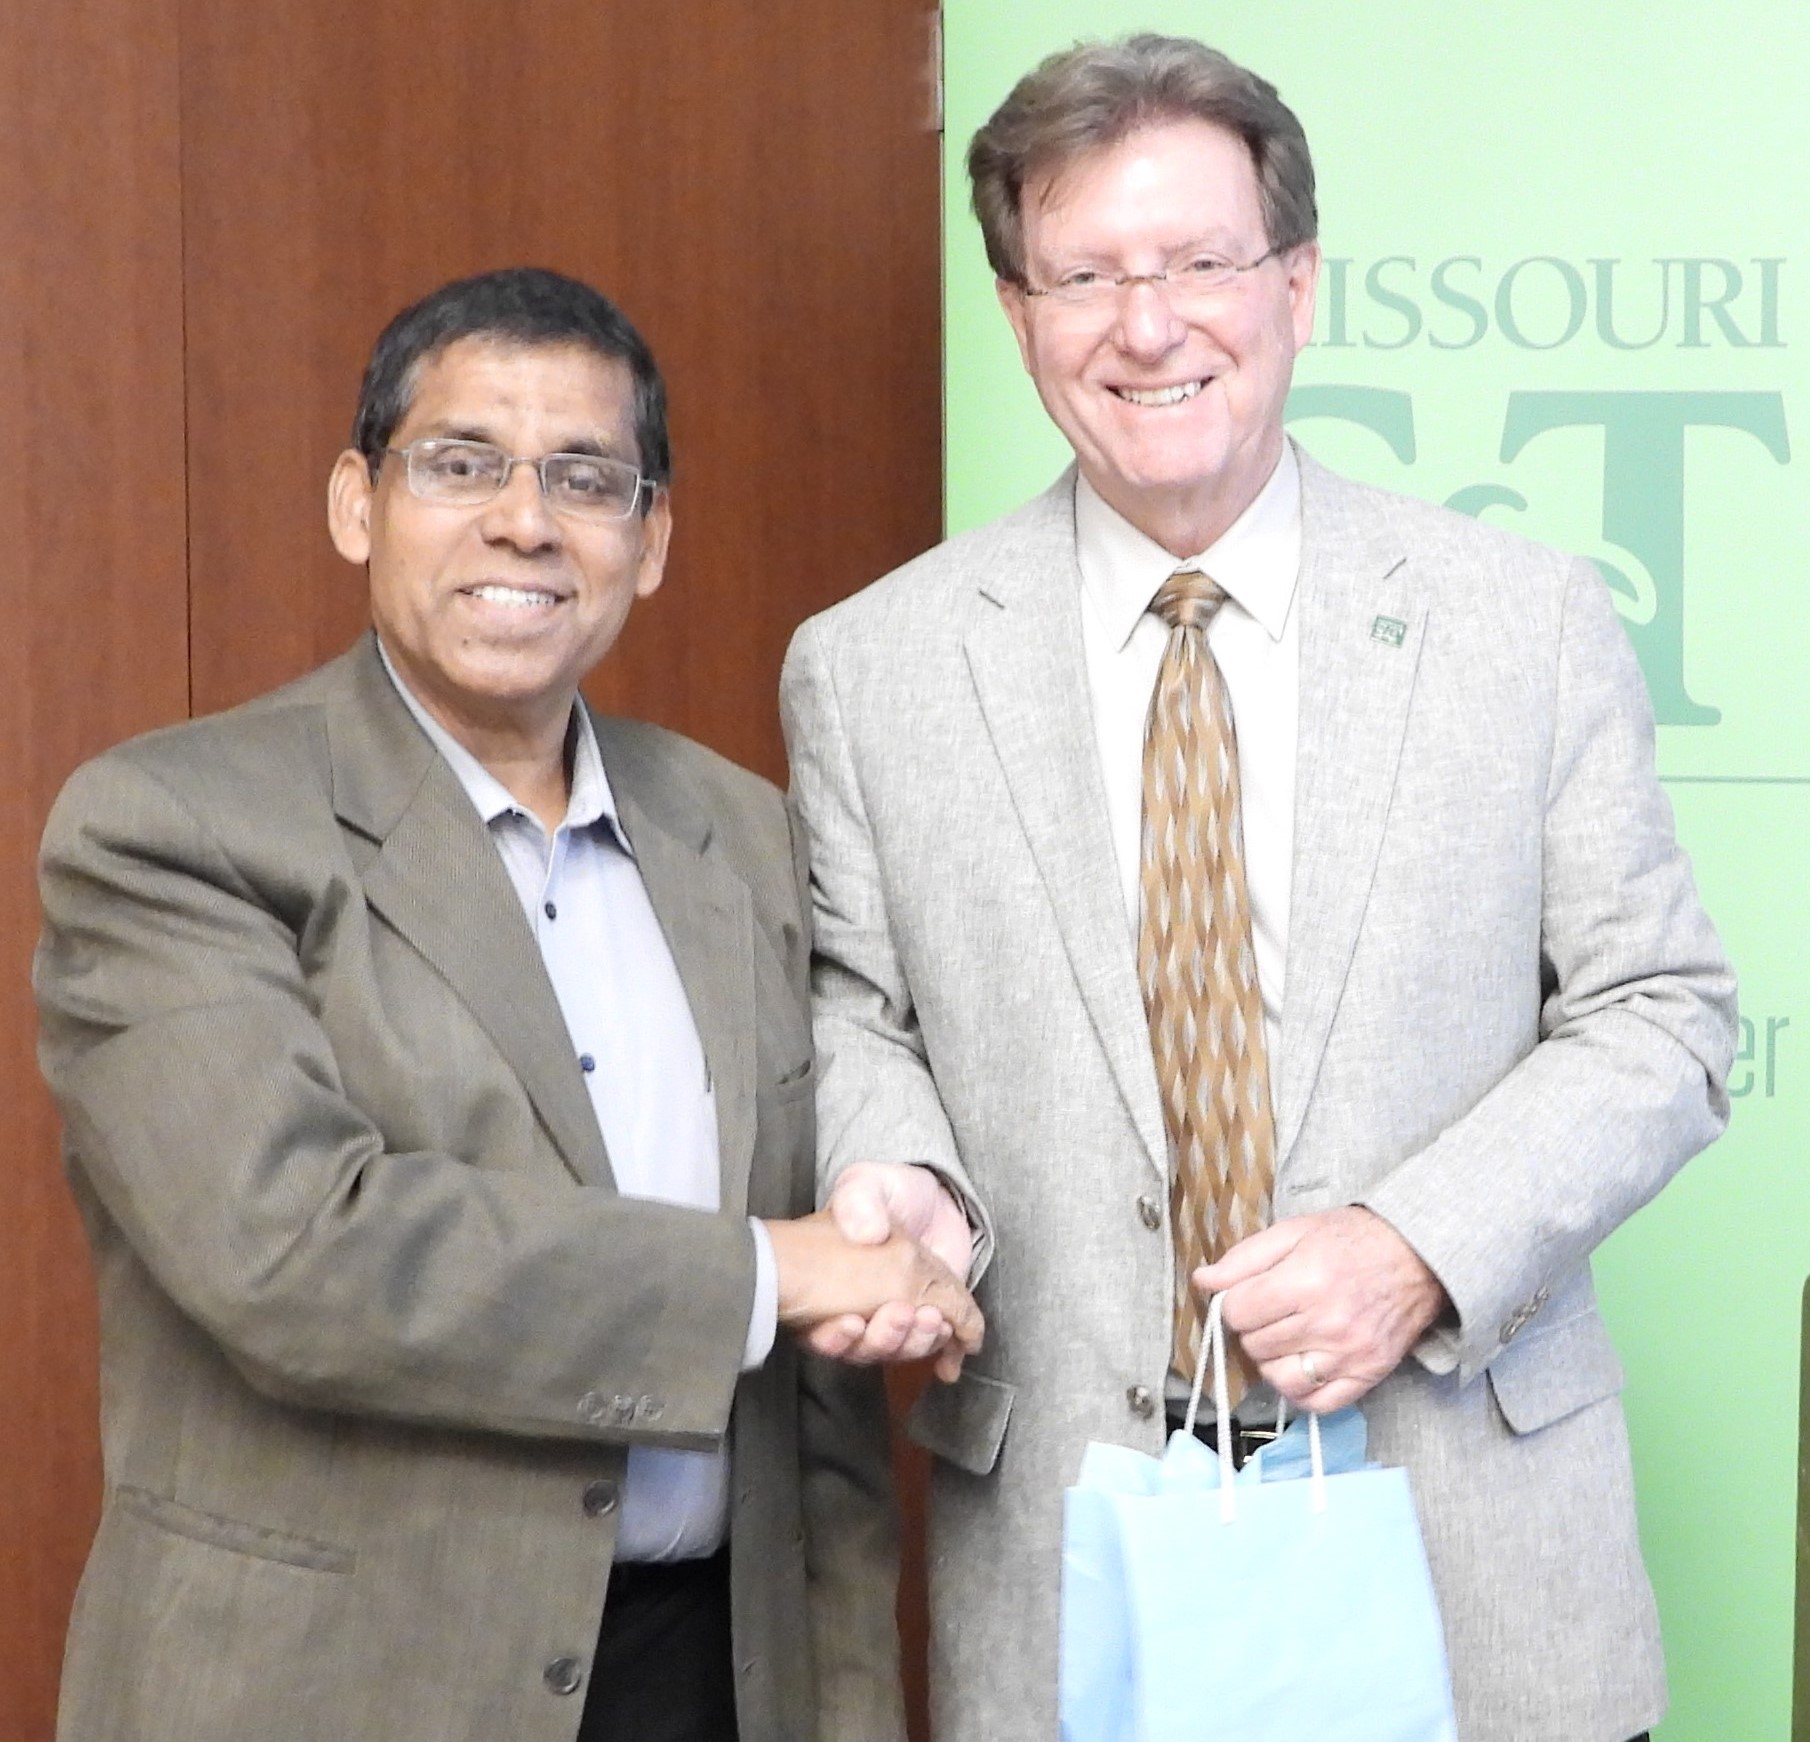 Guest speaker, Timothy Faley, holding a gift bag, shaking hands, and smiling with Sajal Das.